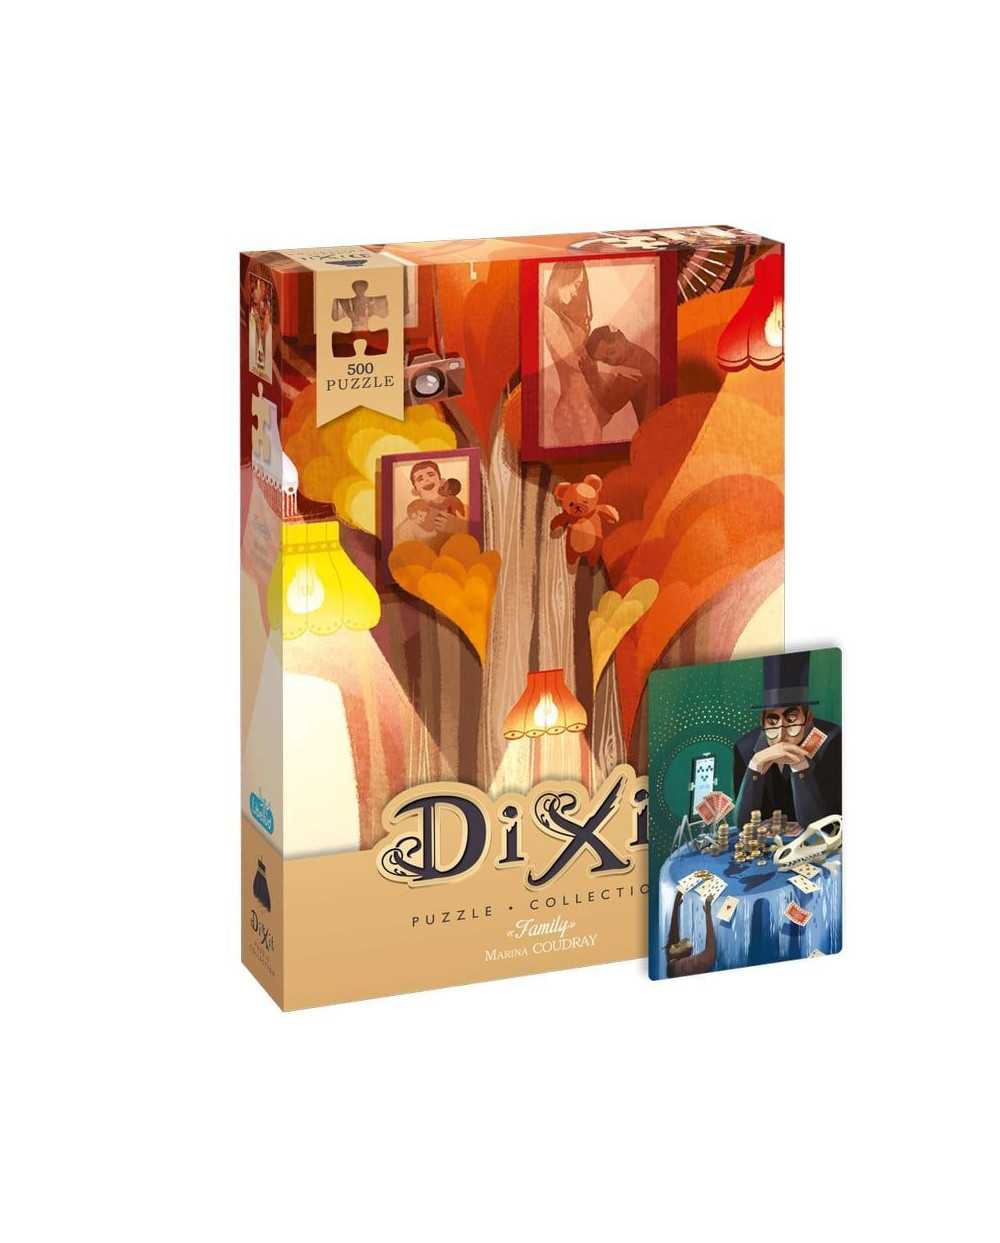 Dixit Puzzle Family Asmodee